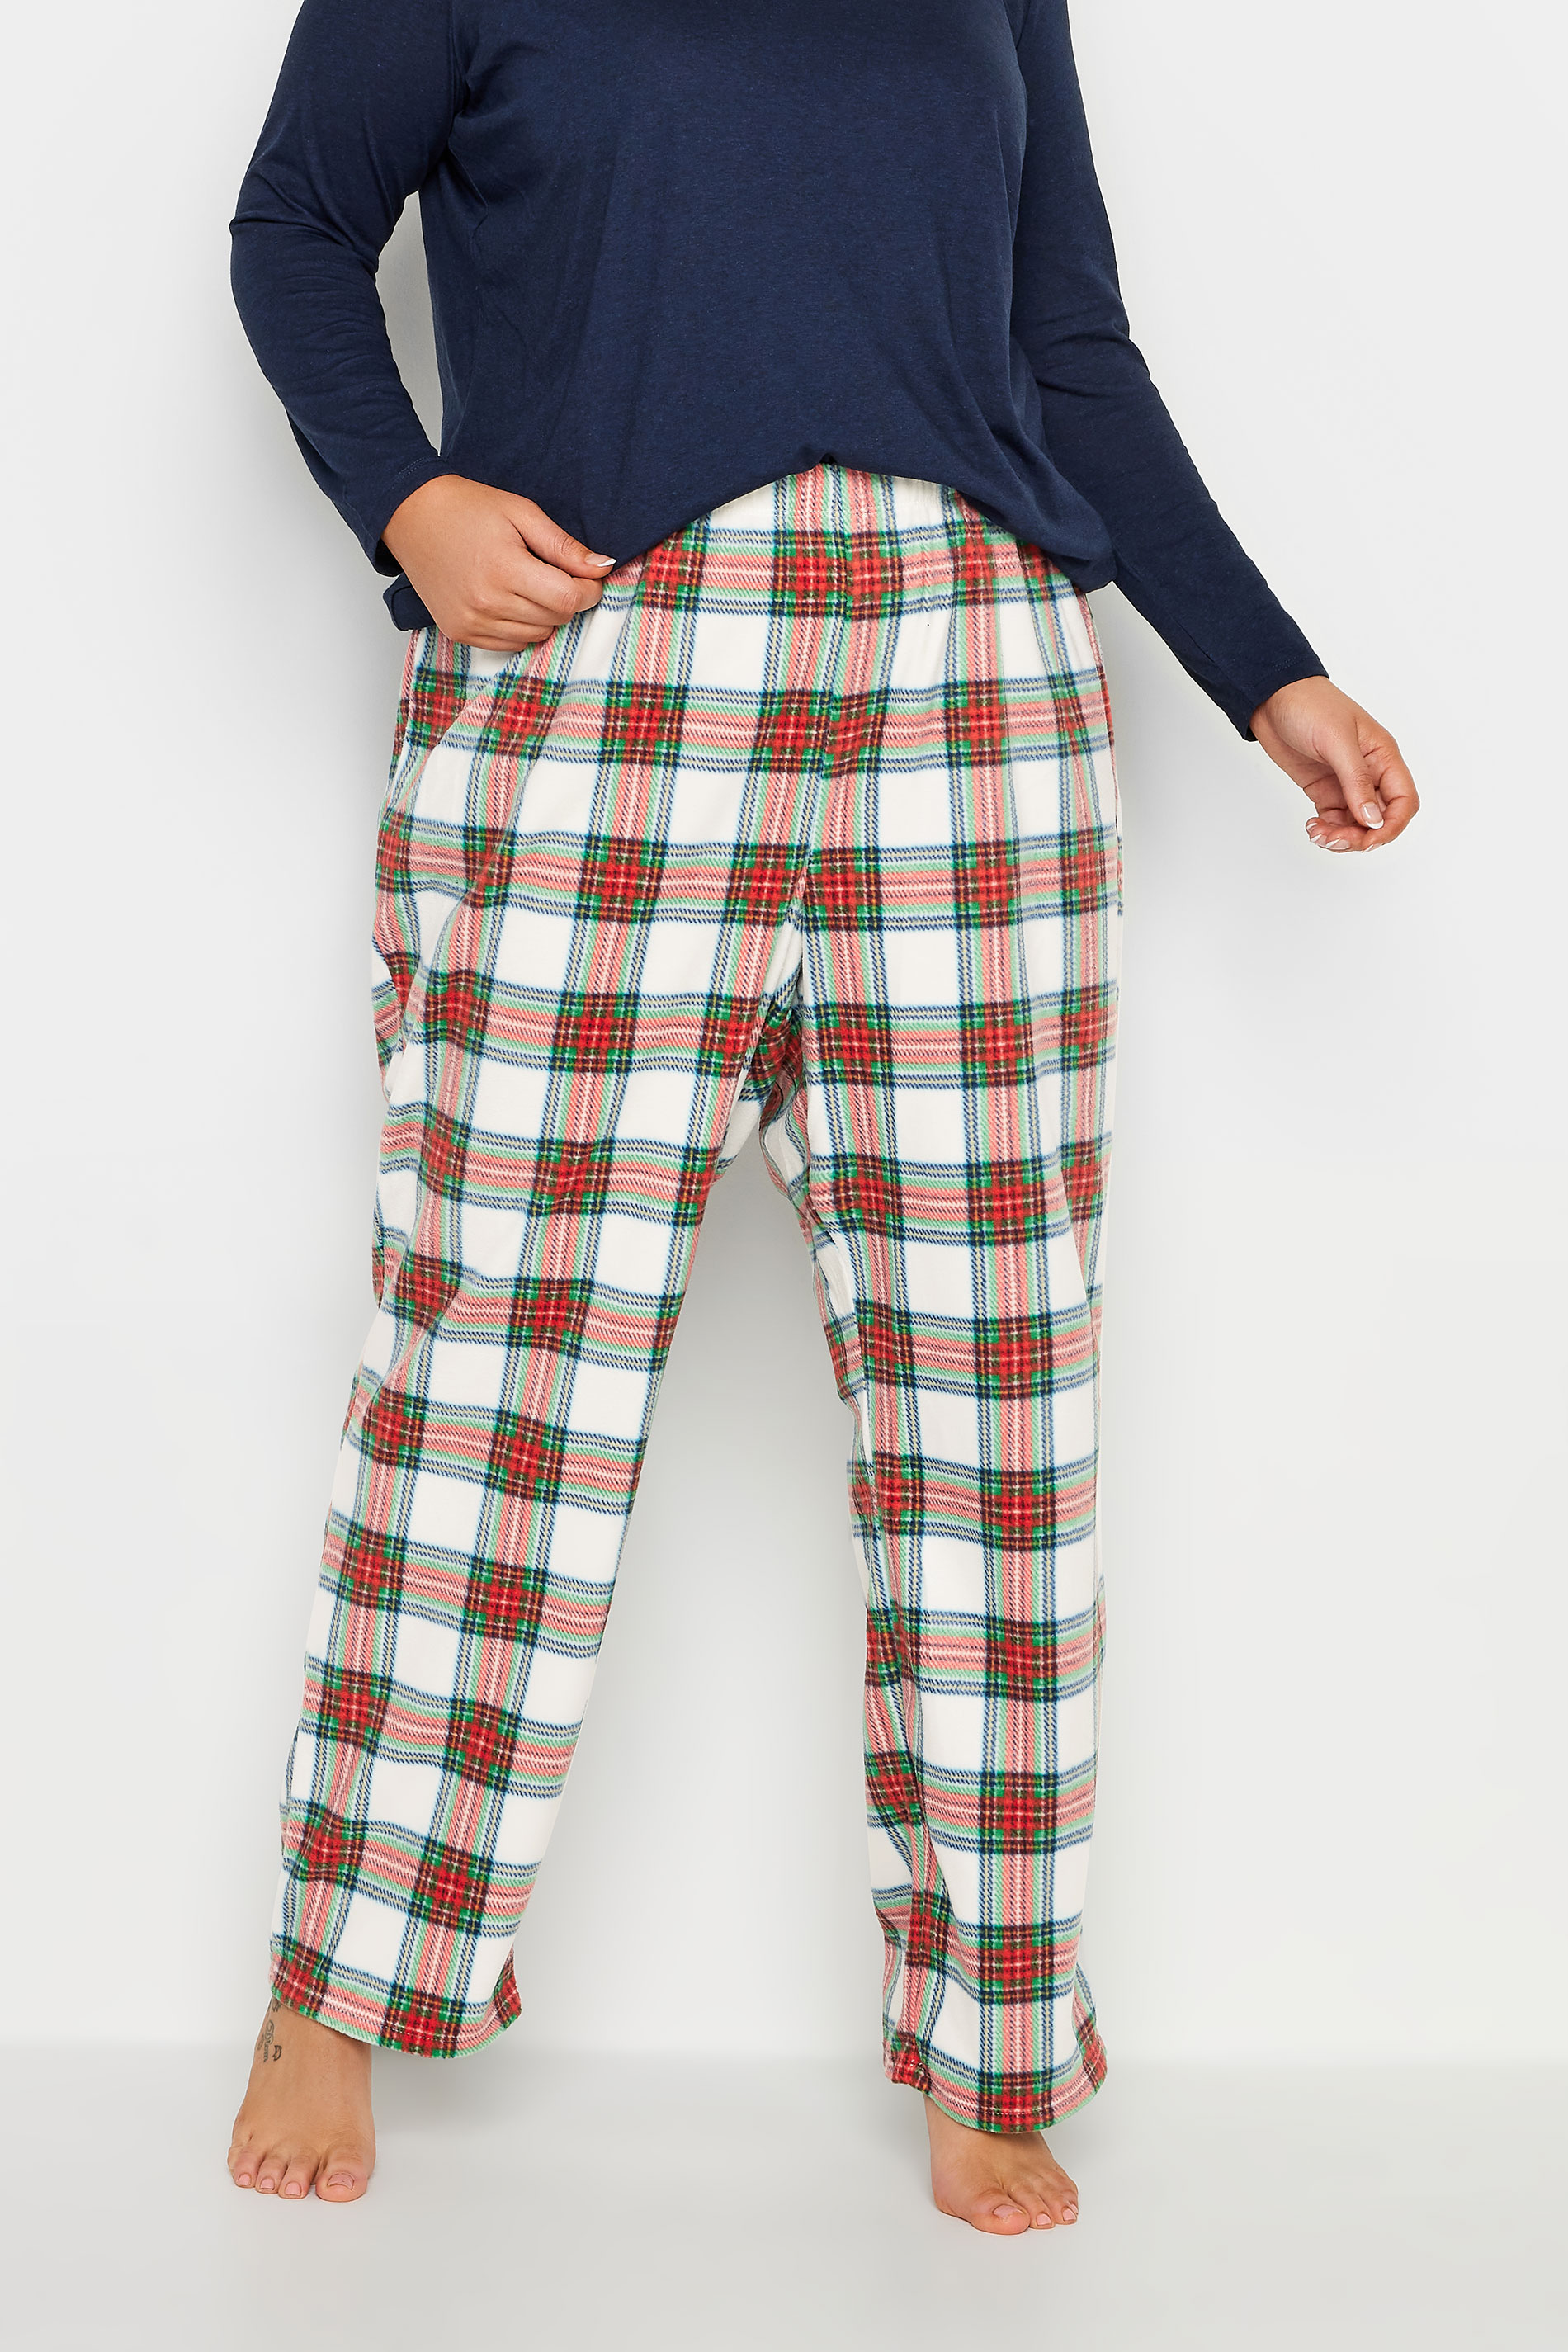 YOURS Curve Plus Size White & Red Tartan Print Fleece Pyjama Bottoms | Yours Clothing  2